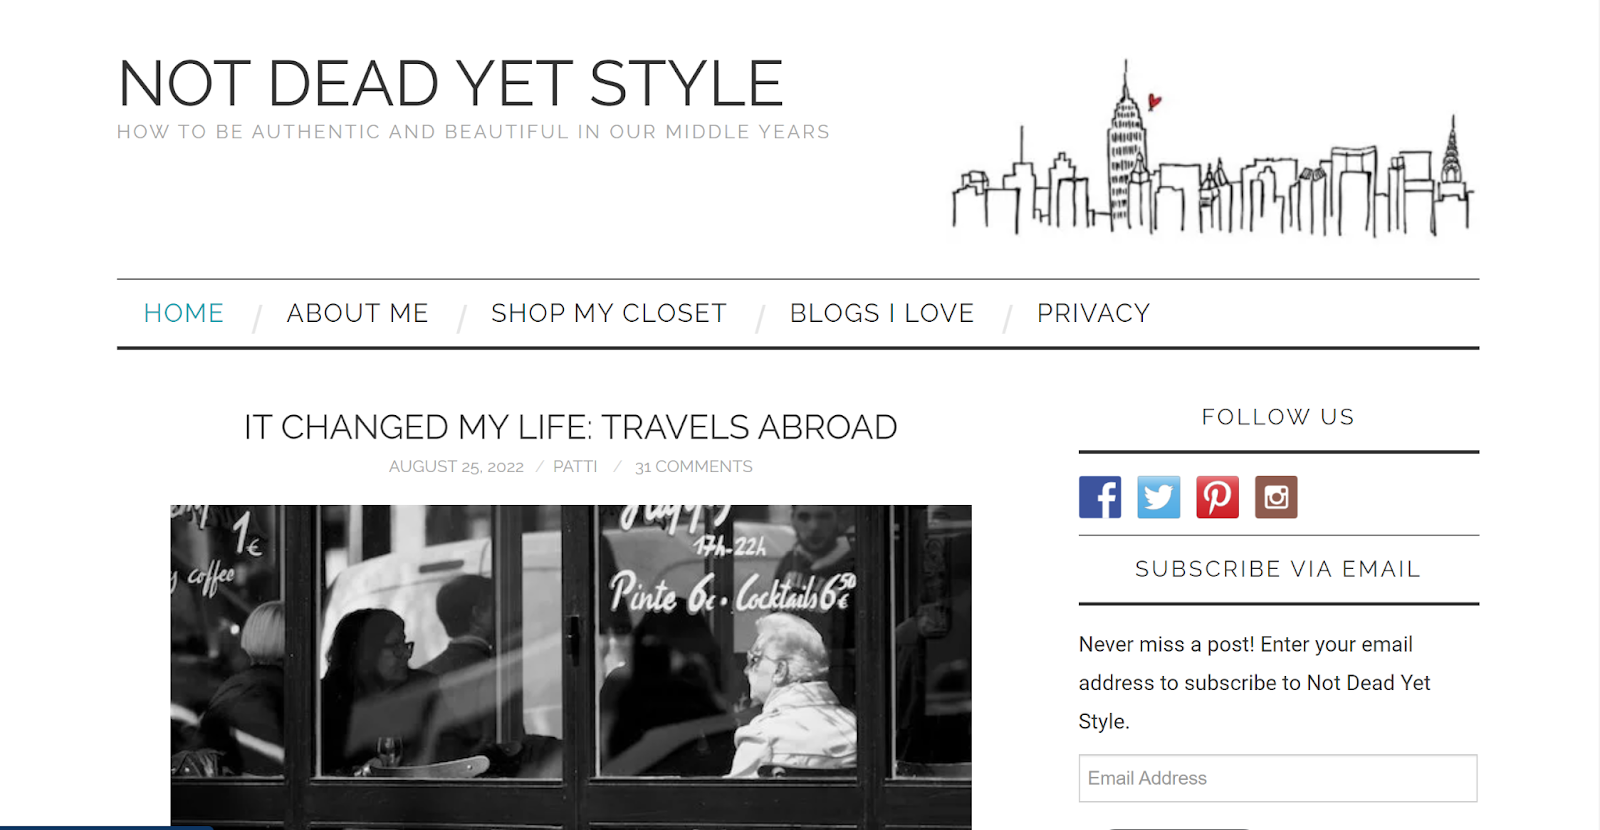 Not Dead Yet Style: A blog perfect for style advice for women in their older years.